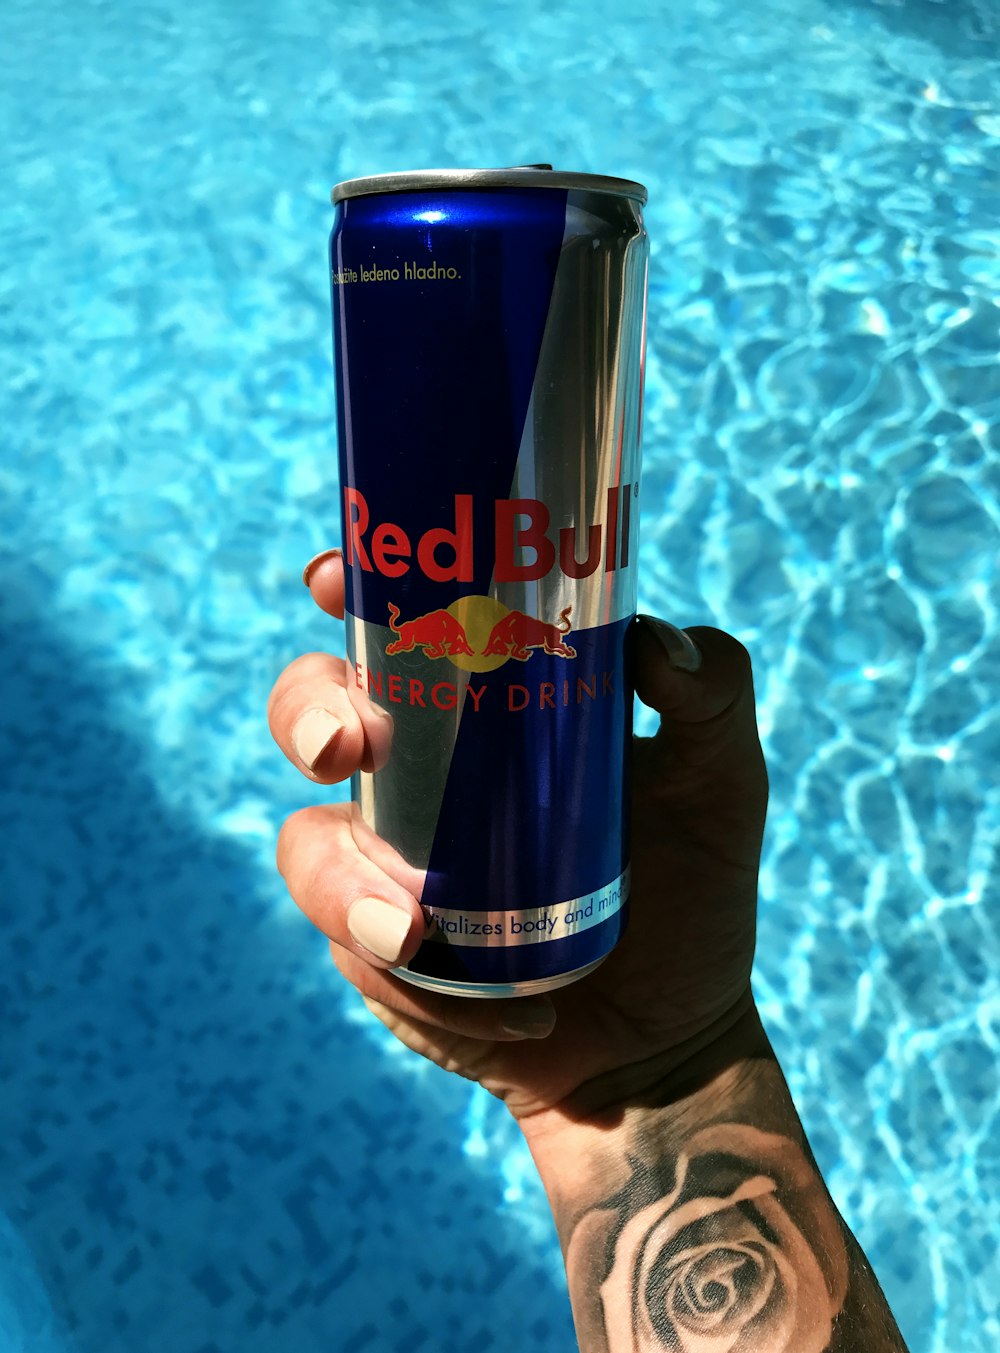 Red Bull Energy Drink Can Photo Free Human Image On Unsplash